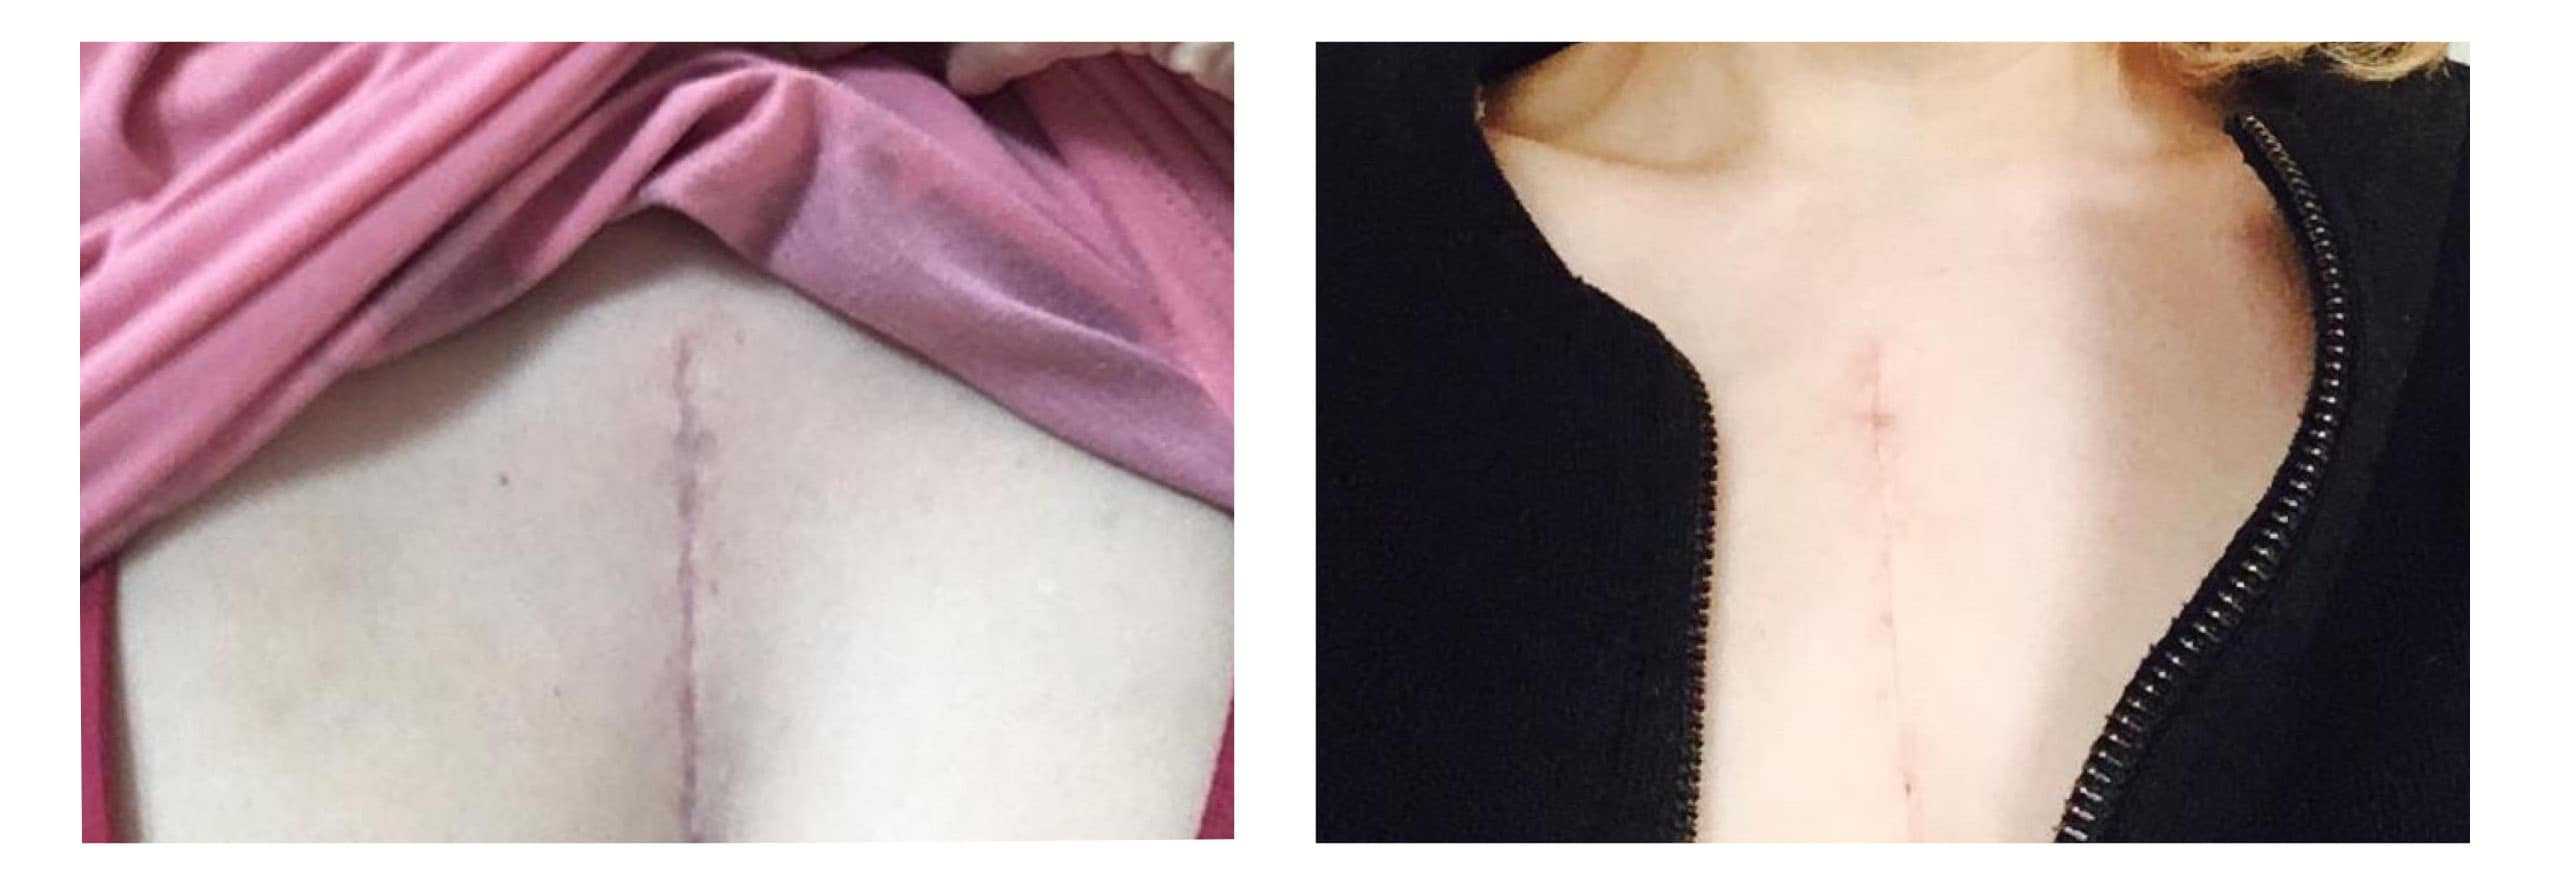 Chest scar before after